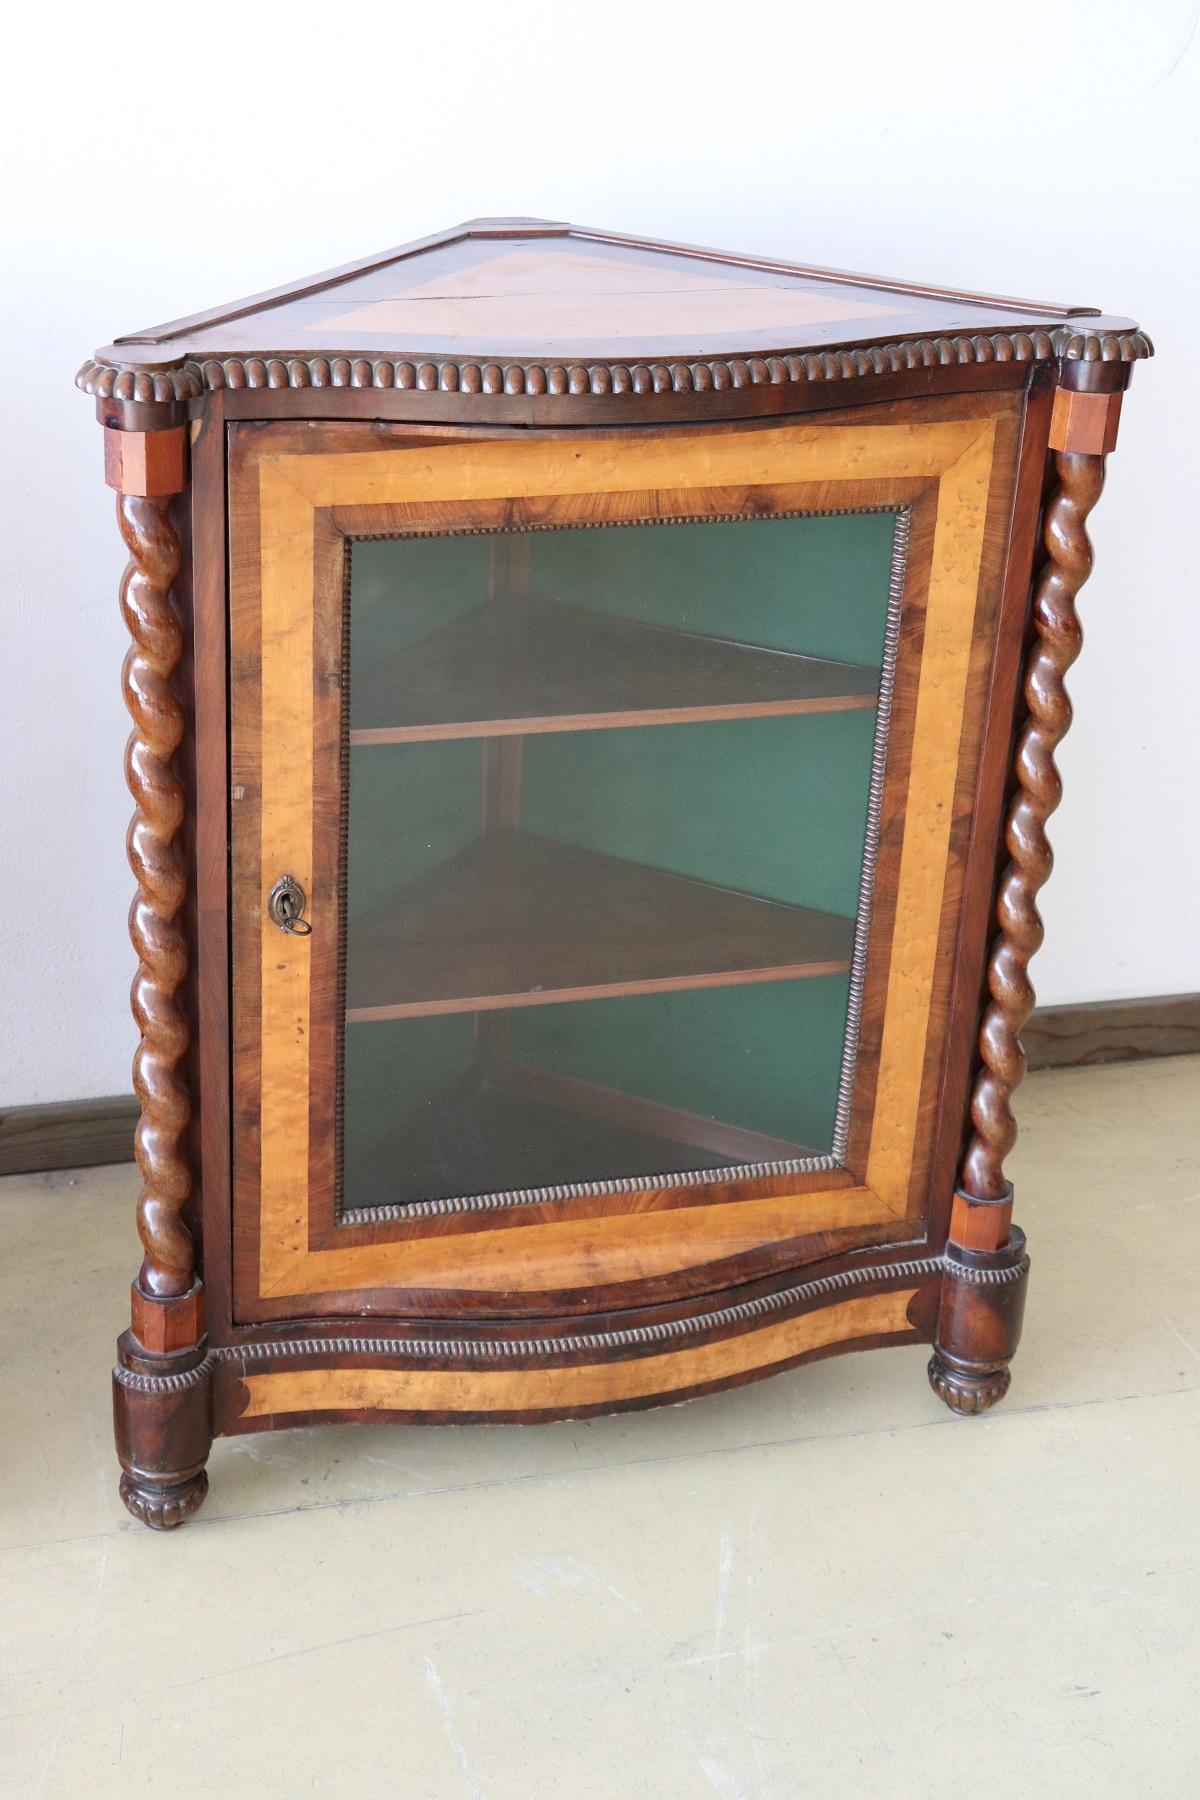 Italian Charles X corner cupboard in precious mahogany wood and birch briar. The back inside is covered in green fabric. On the front two elegant decorative turned columns. Very particular the combination of the color of the two different woods,